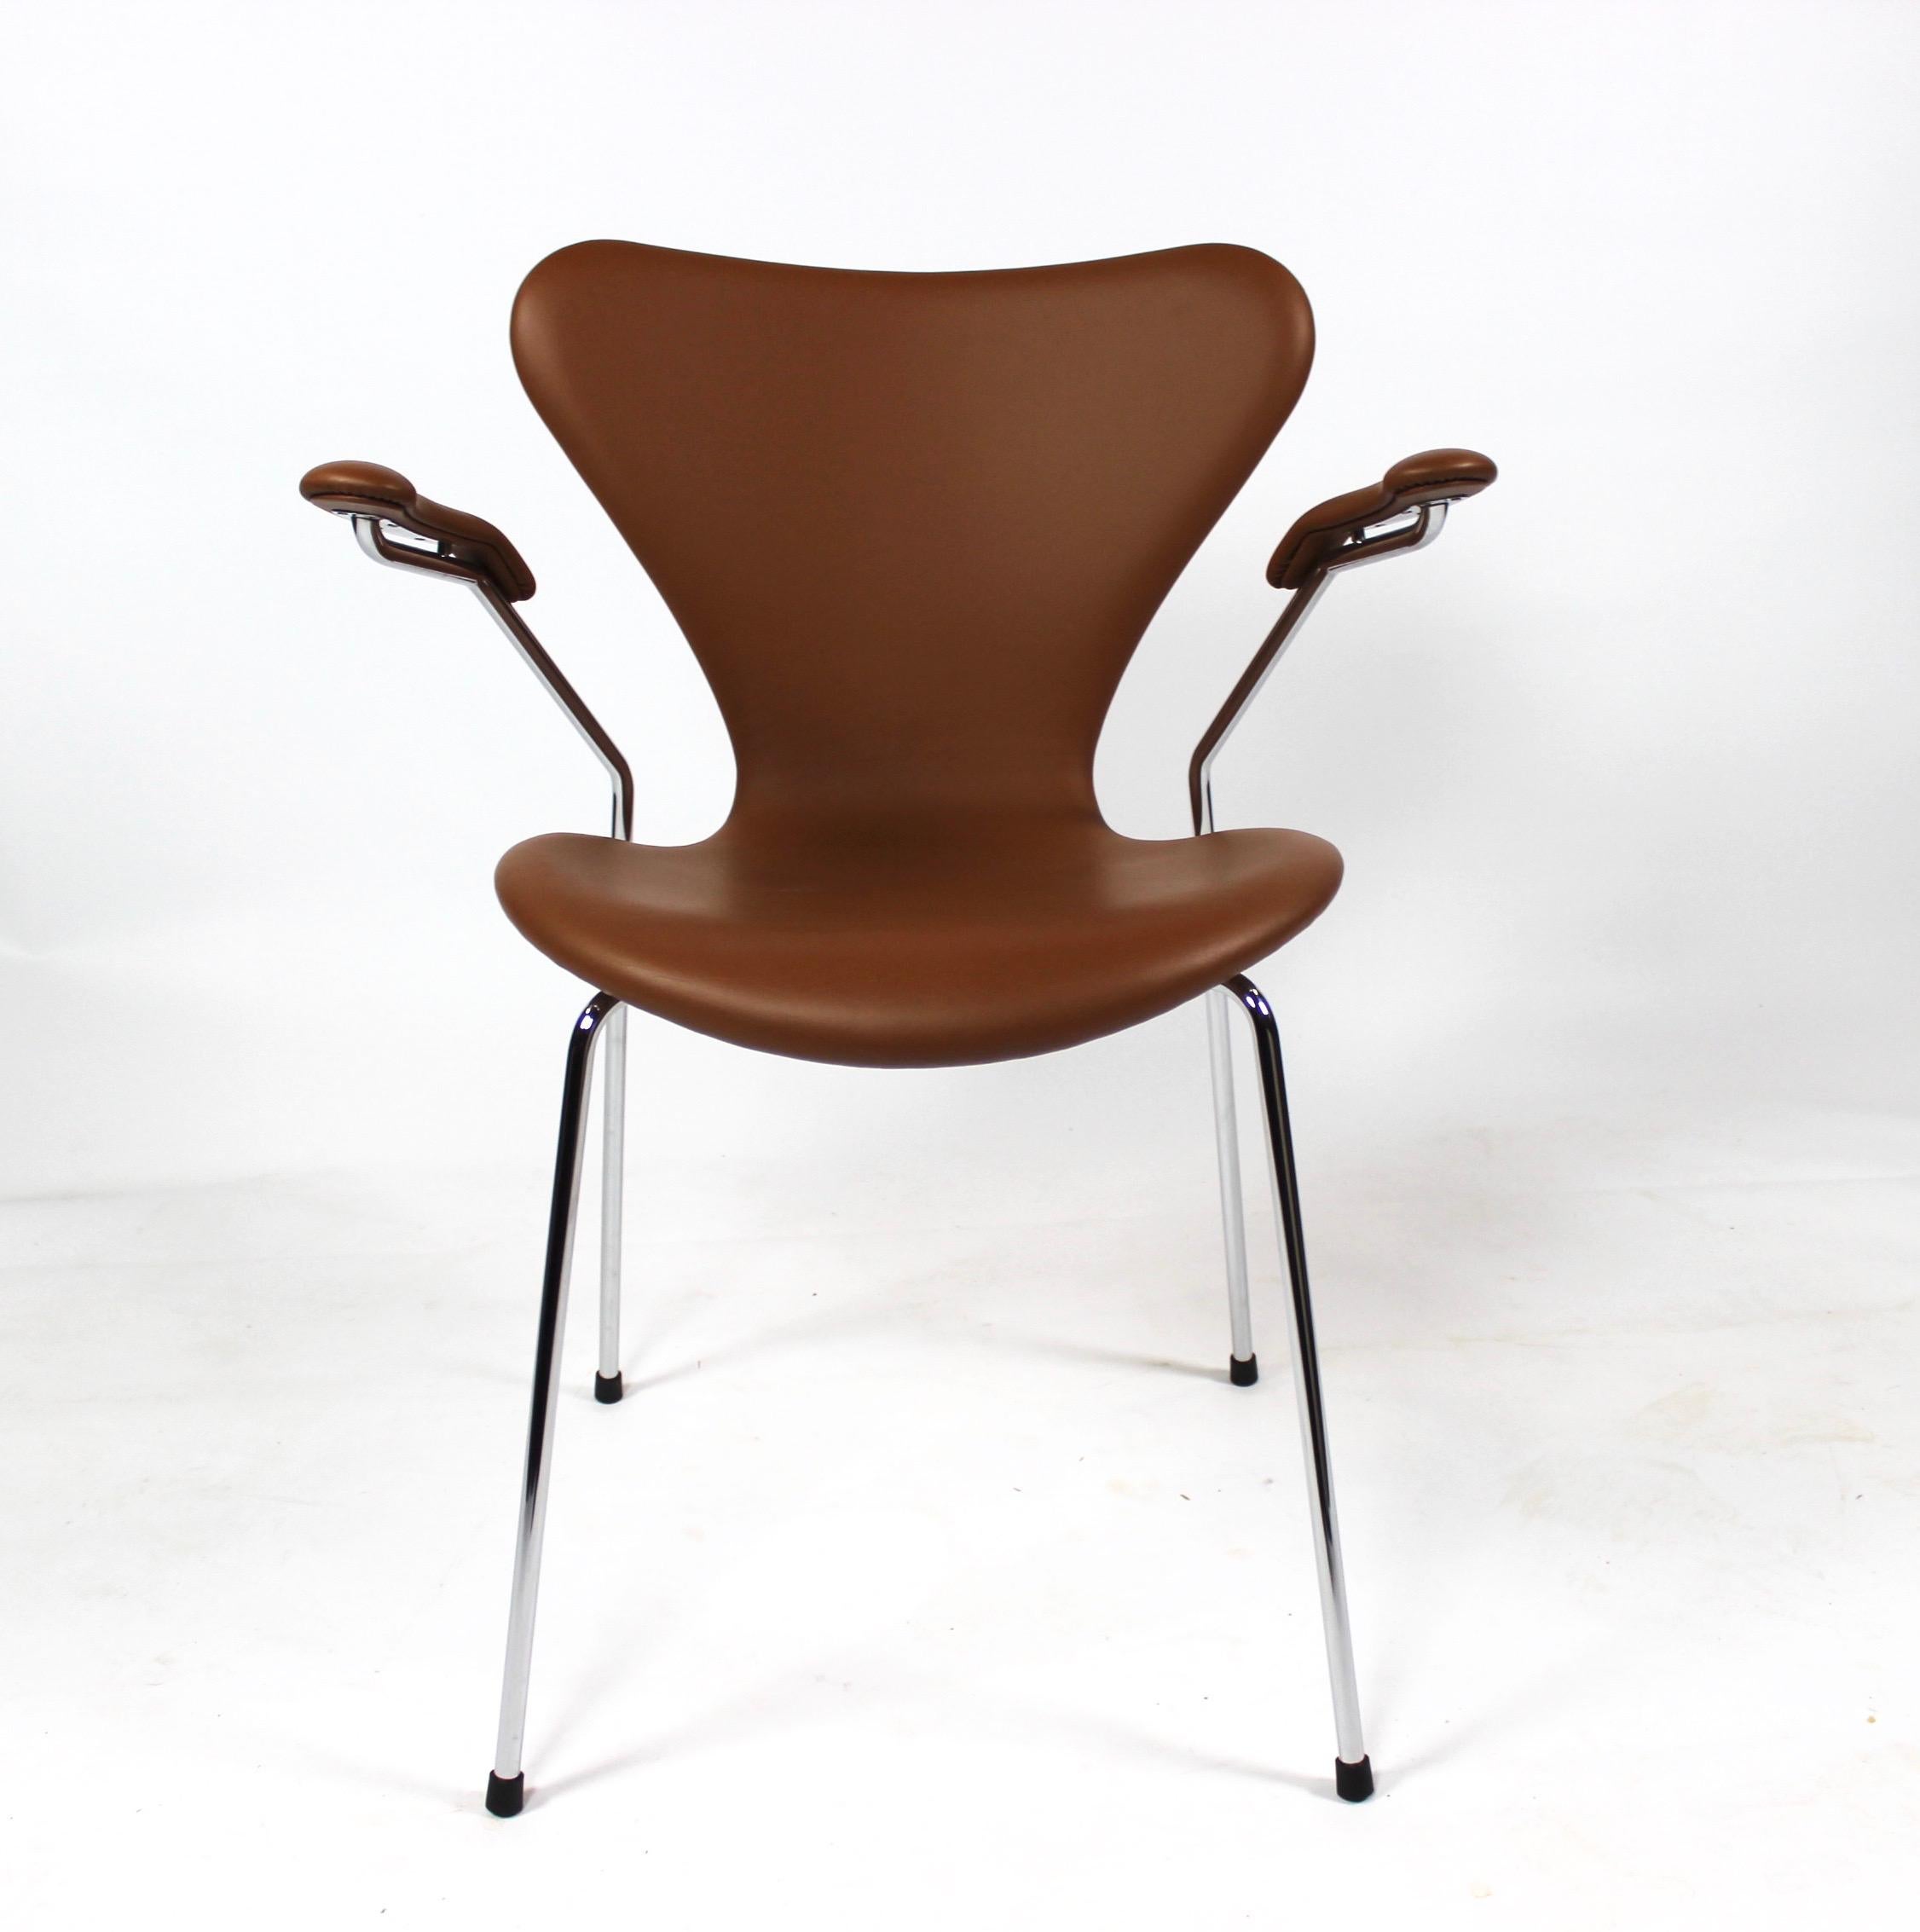 Scandinavian Modern Set of Seven Chairs, Model 3207, with Armrests in Cognac Colored, 2019